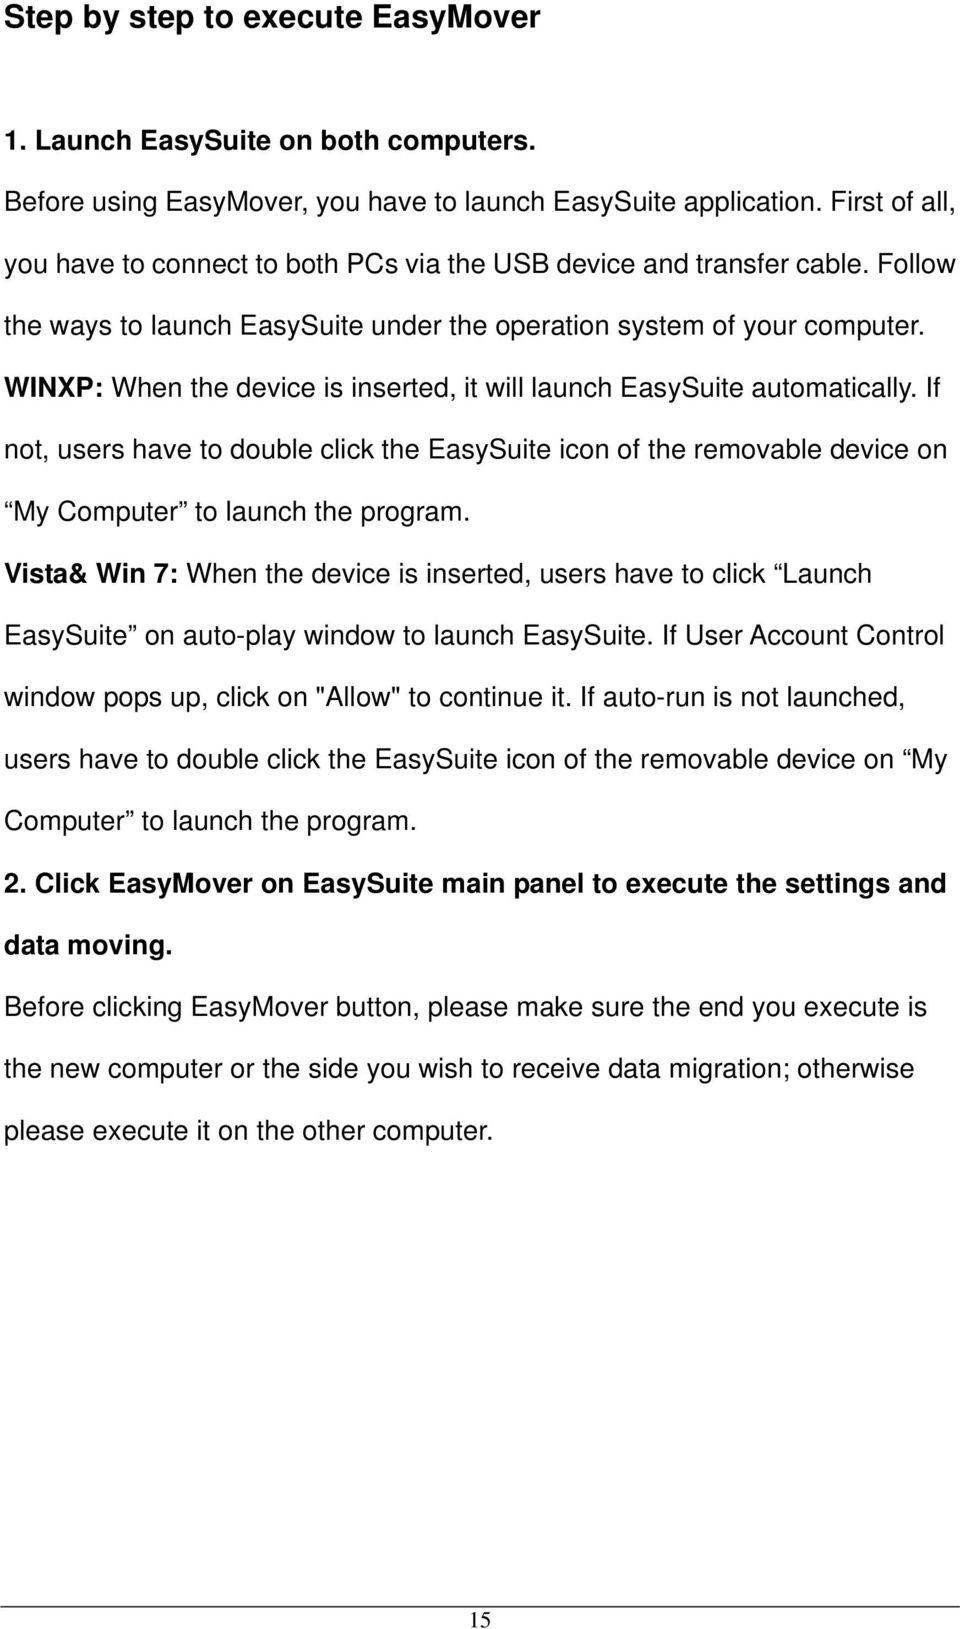 WINXP: When the device is inserted, it will launch EasySuite automatically. If not, users have to double click the EasySuite icon of the removable device on My Computer to launch the program.